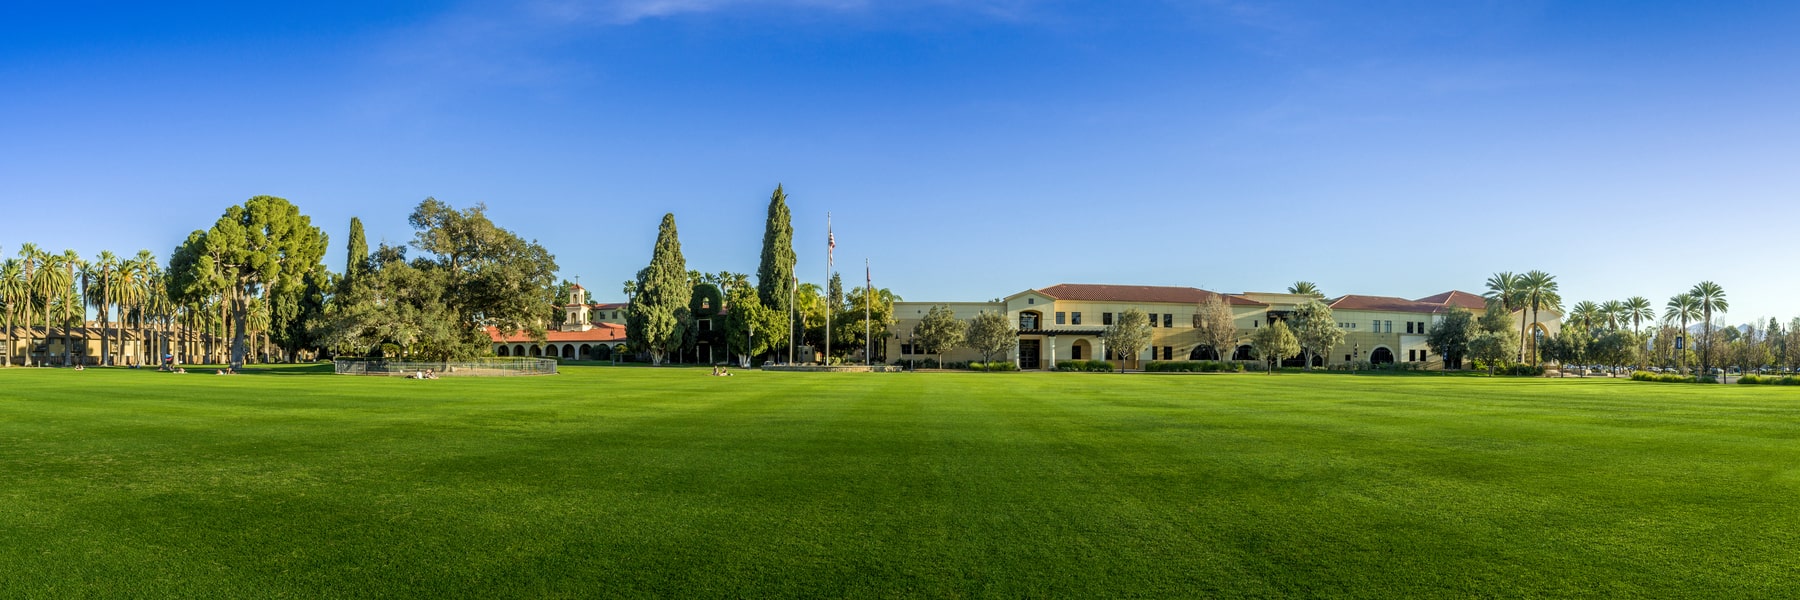 Front lawn of CBU with campus buildings in the background